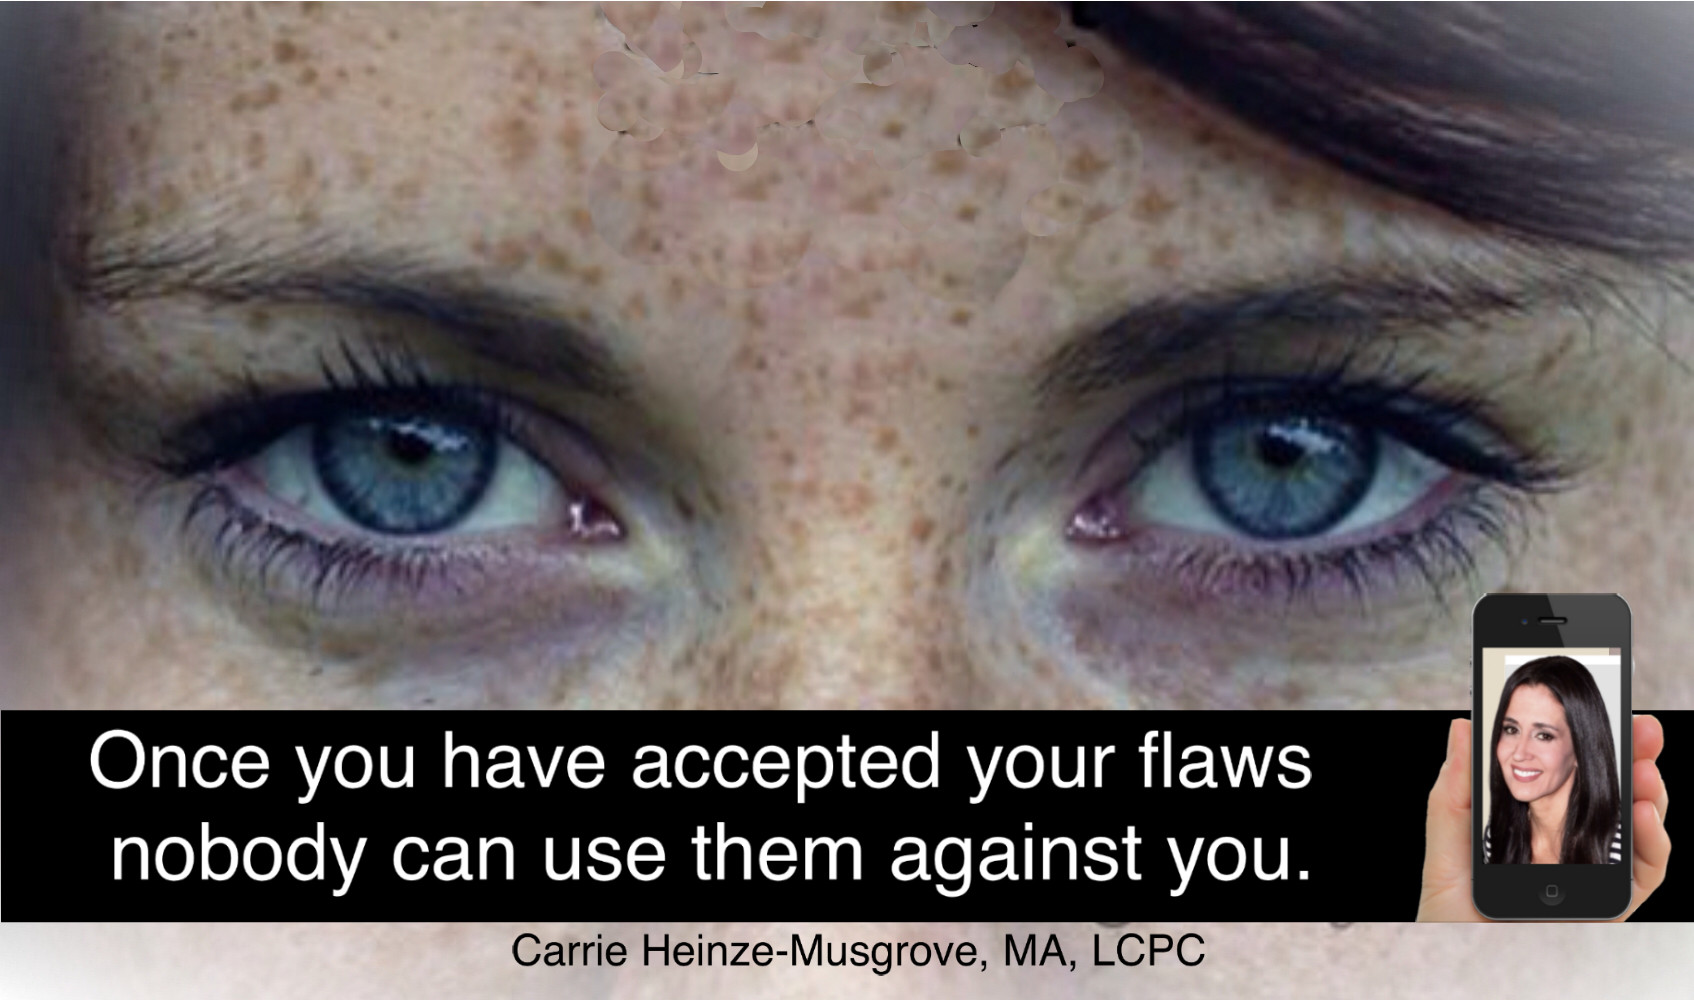 YOU give meaning to your flaws.